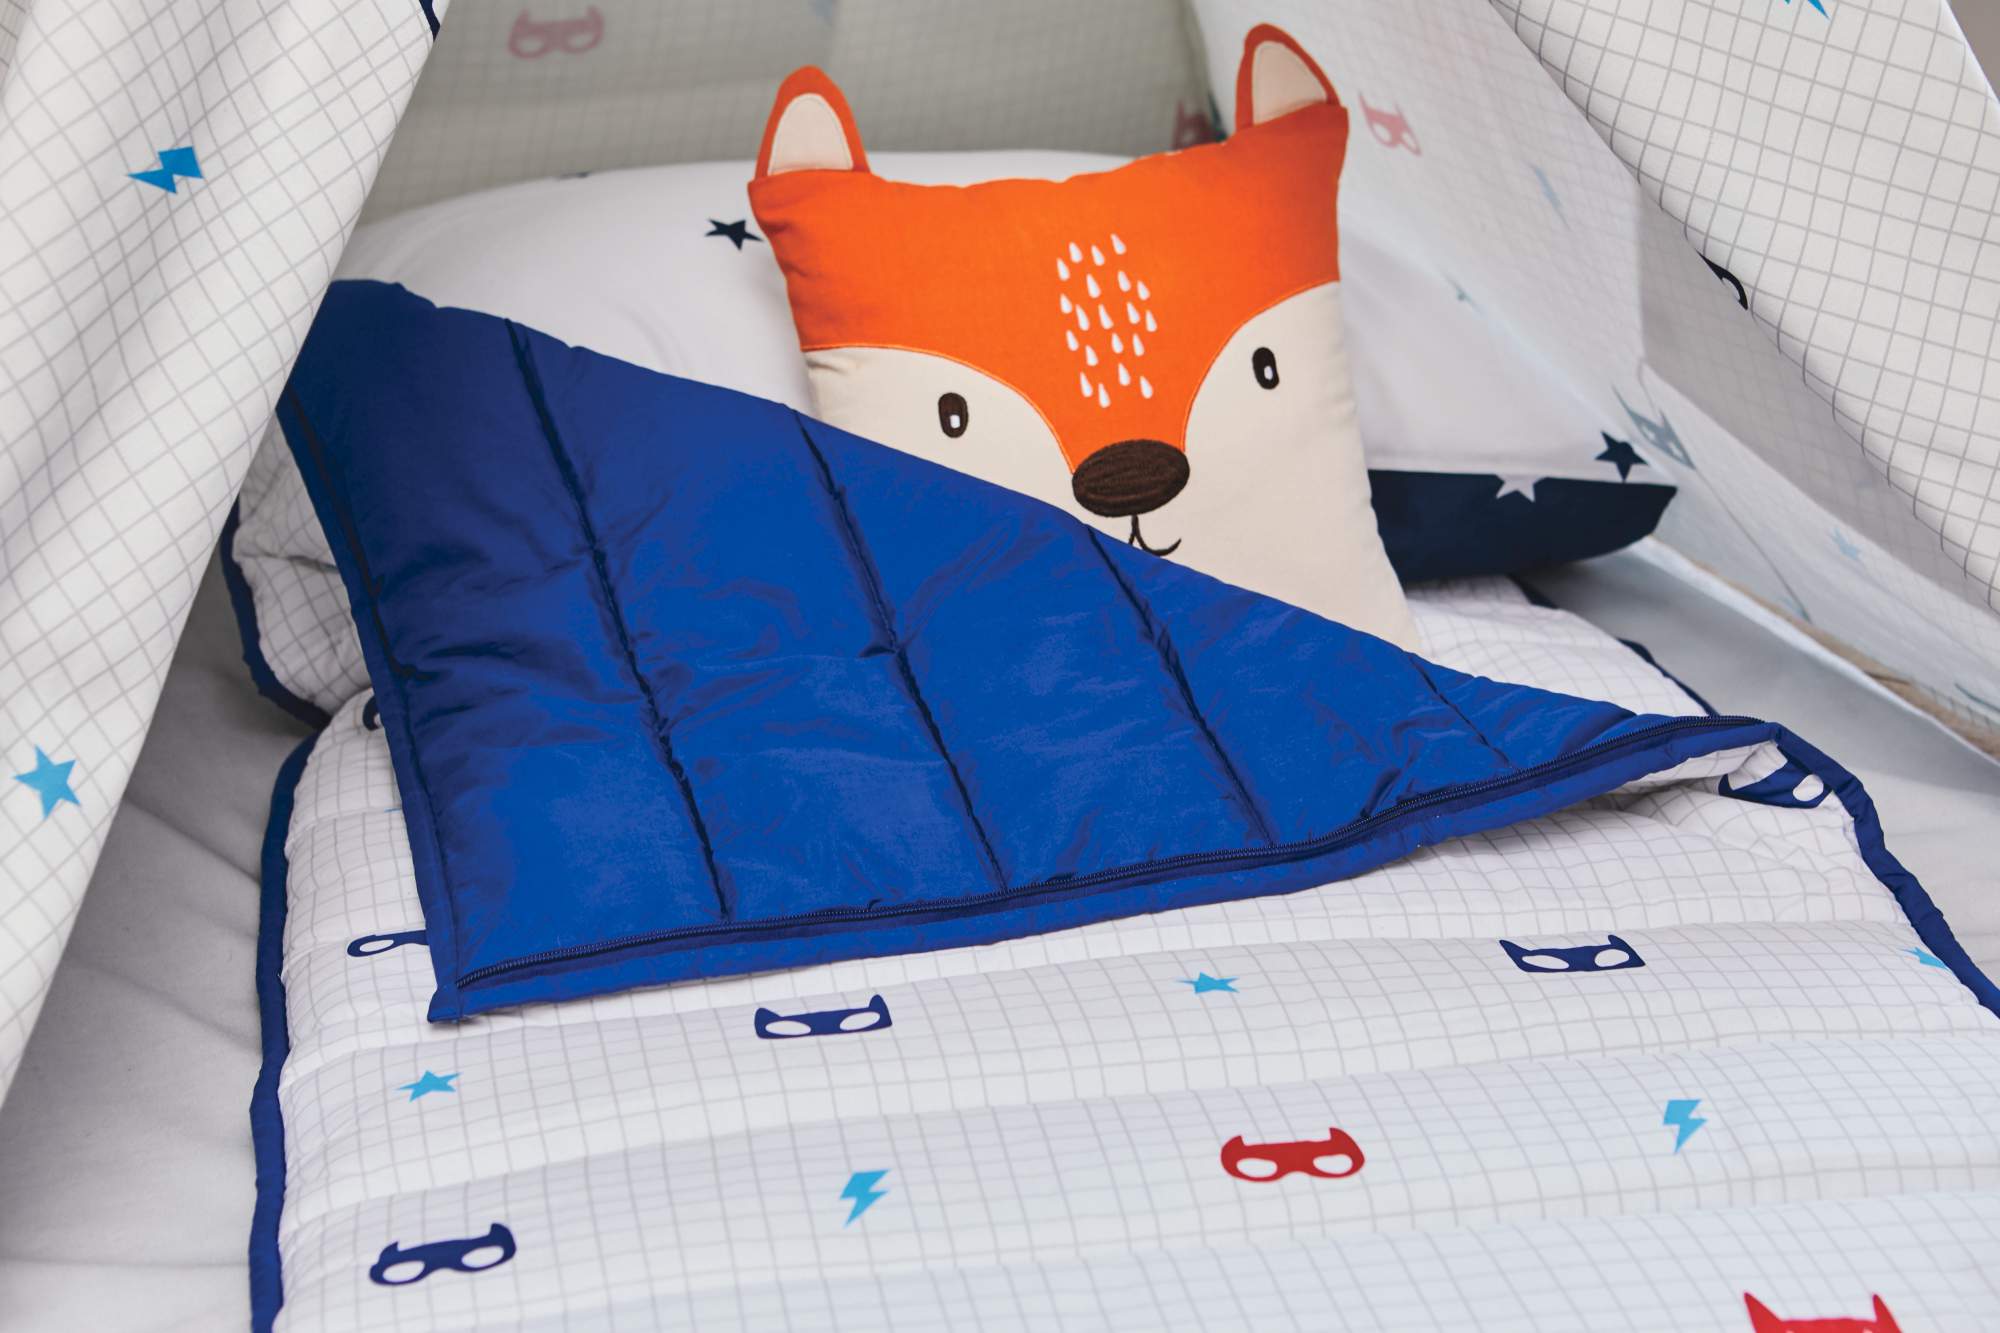 Get ready for friends and family staying over at Christmas with our spare beds and sleeping bags